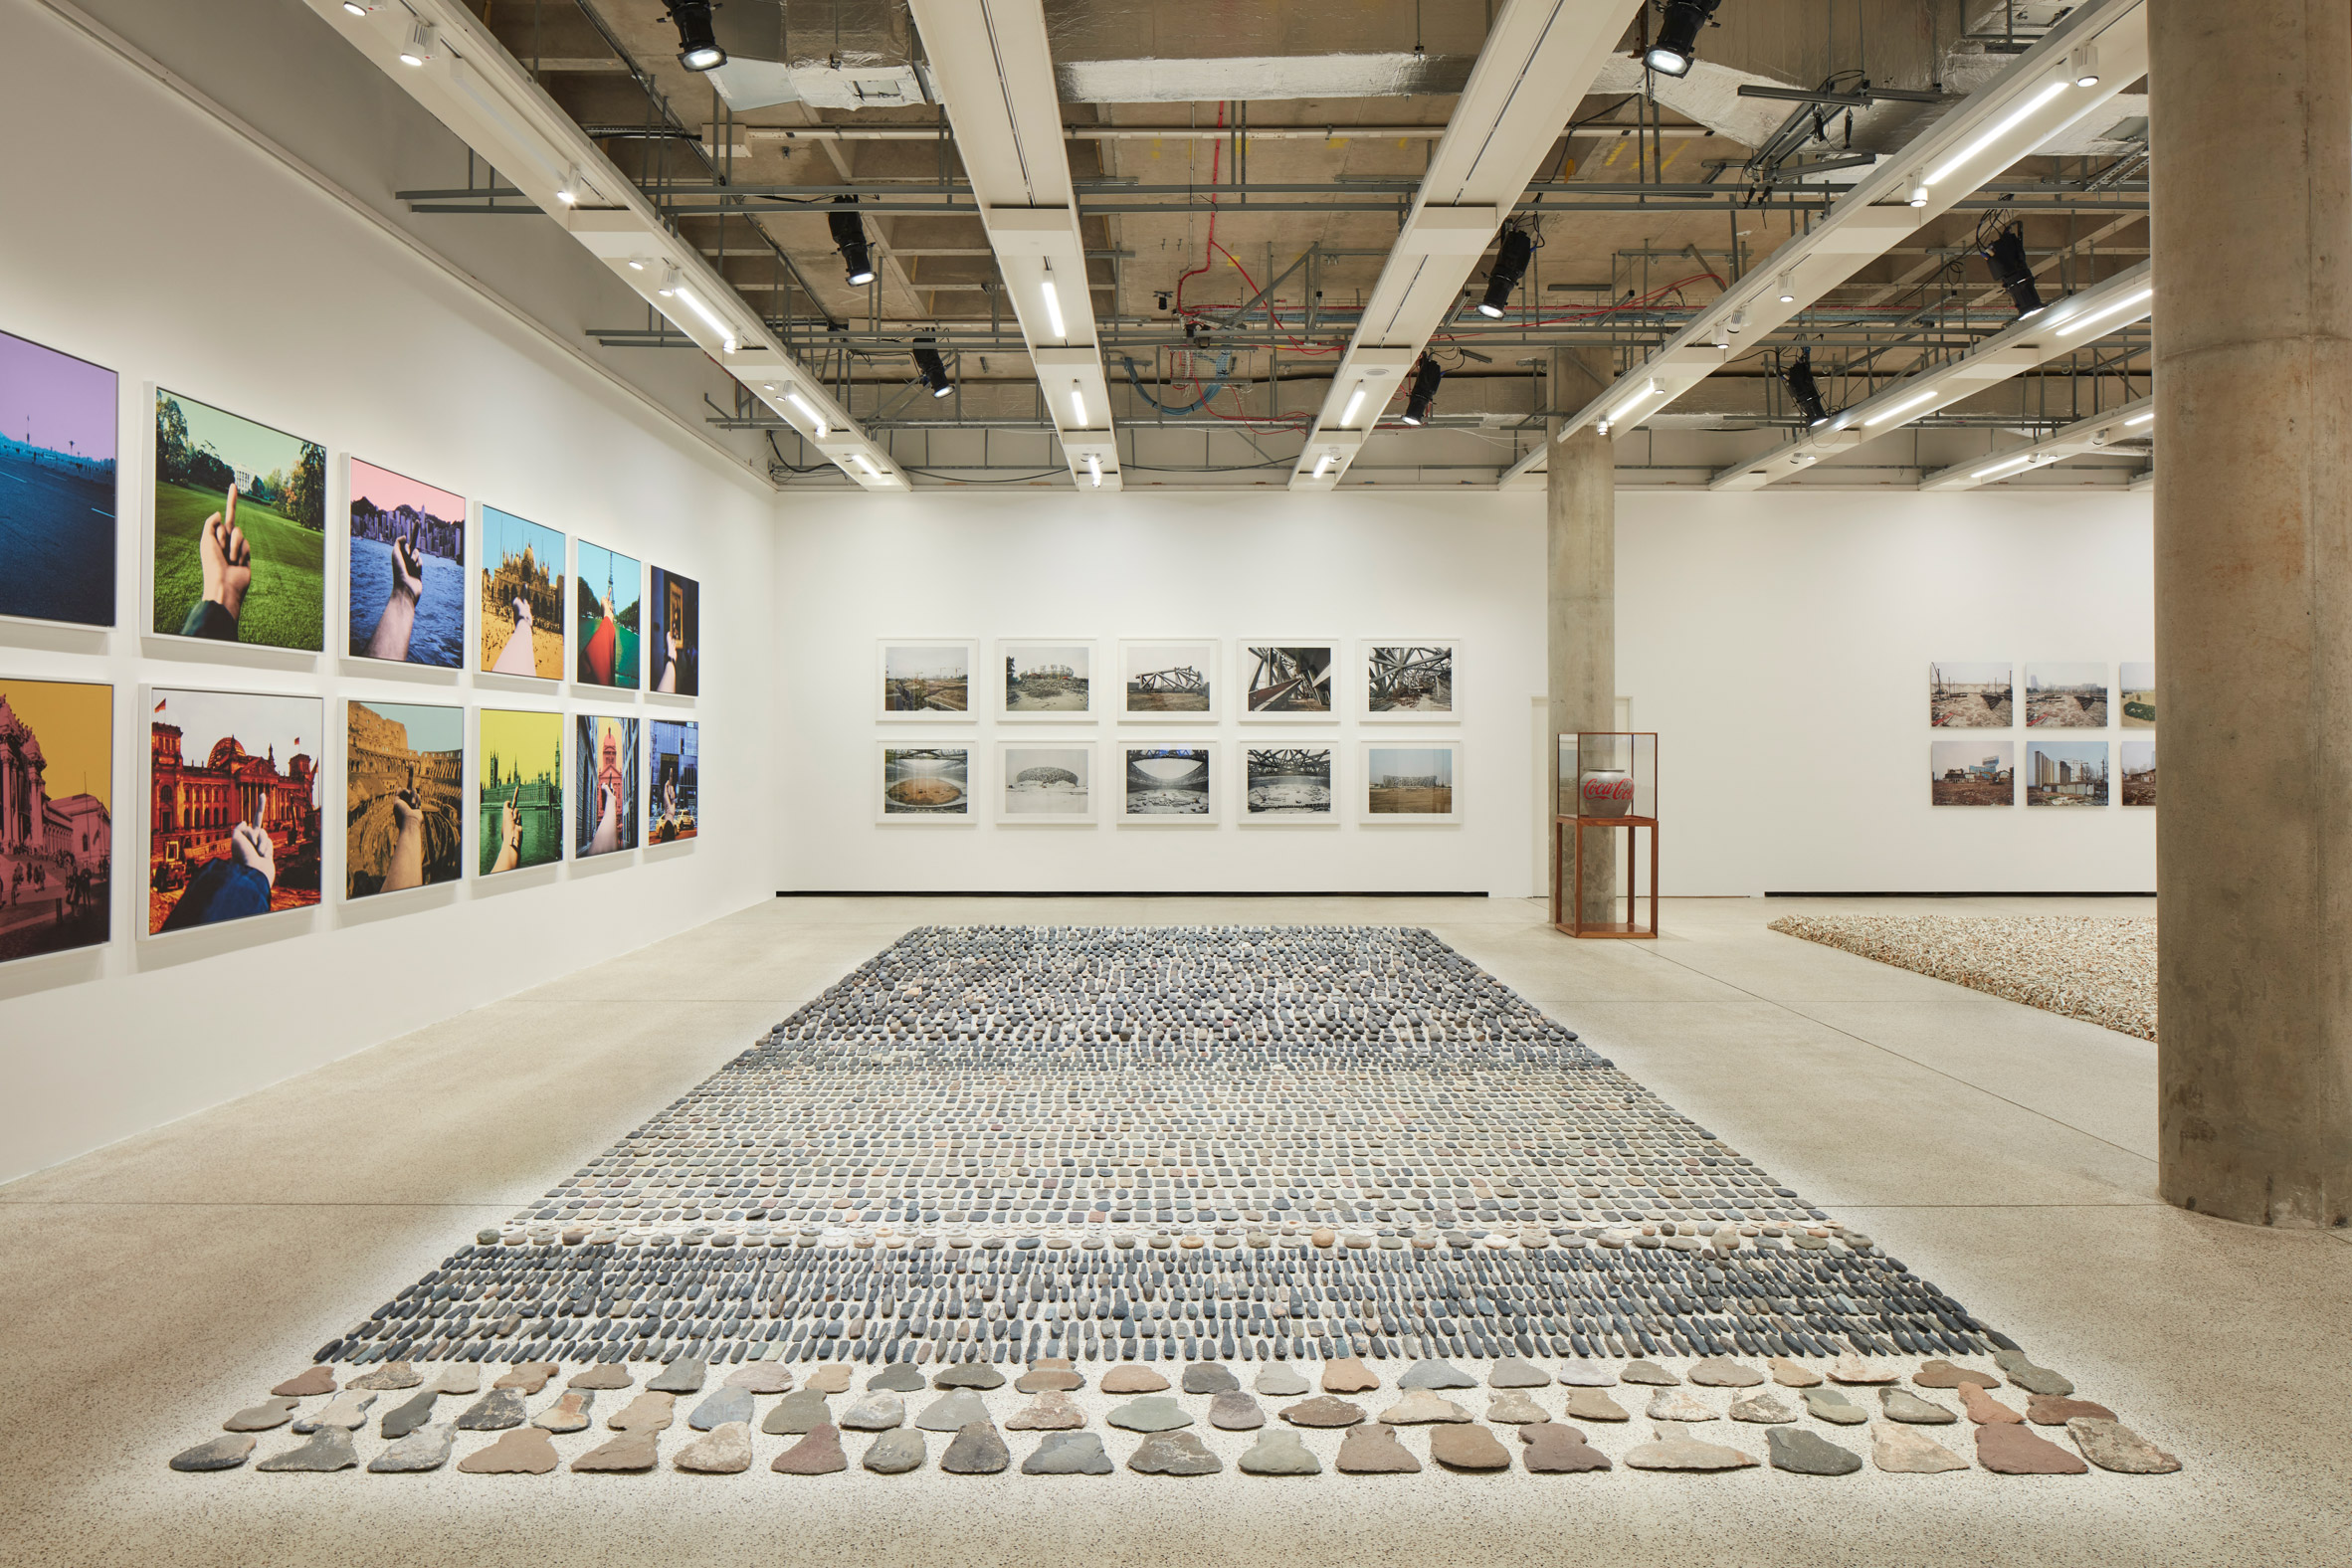 Photographs of the National Stadium at the Making Sense exhibition by Ai Weiwei